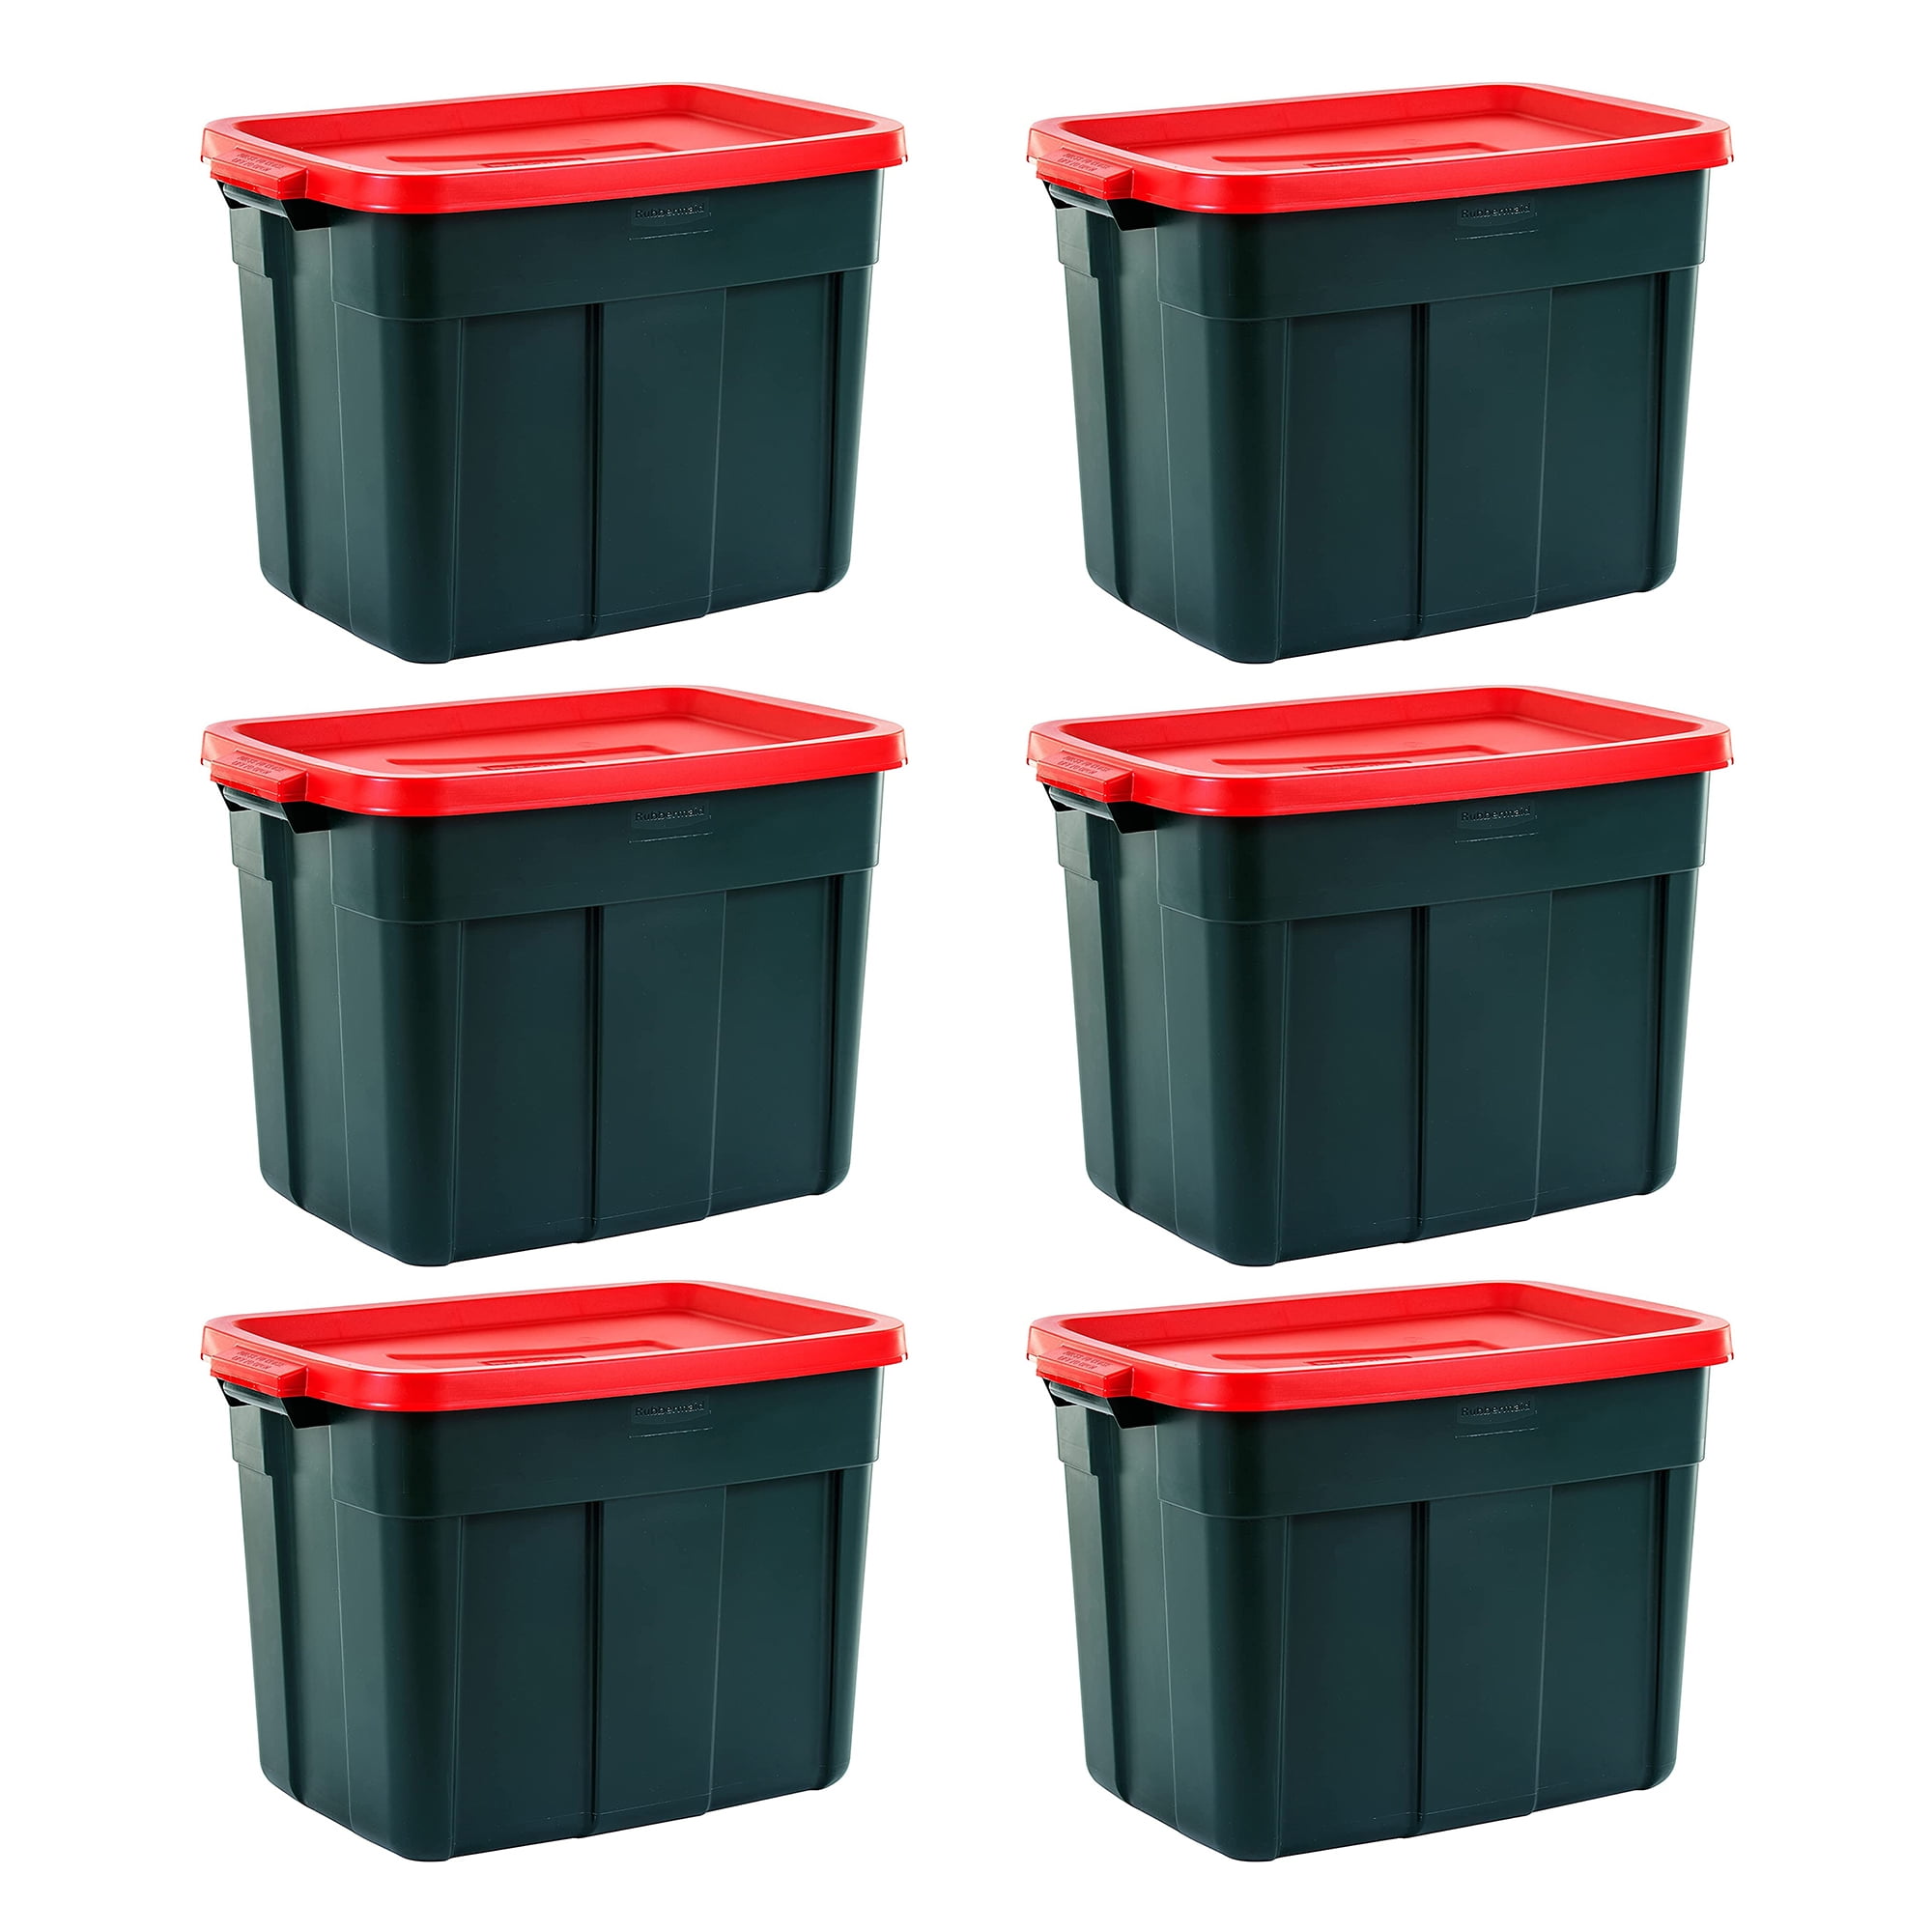 Rubbermaid Roughneck 18 Gal Holiday Storage Tote, Green & Red (6 Pack)